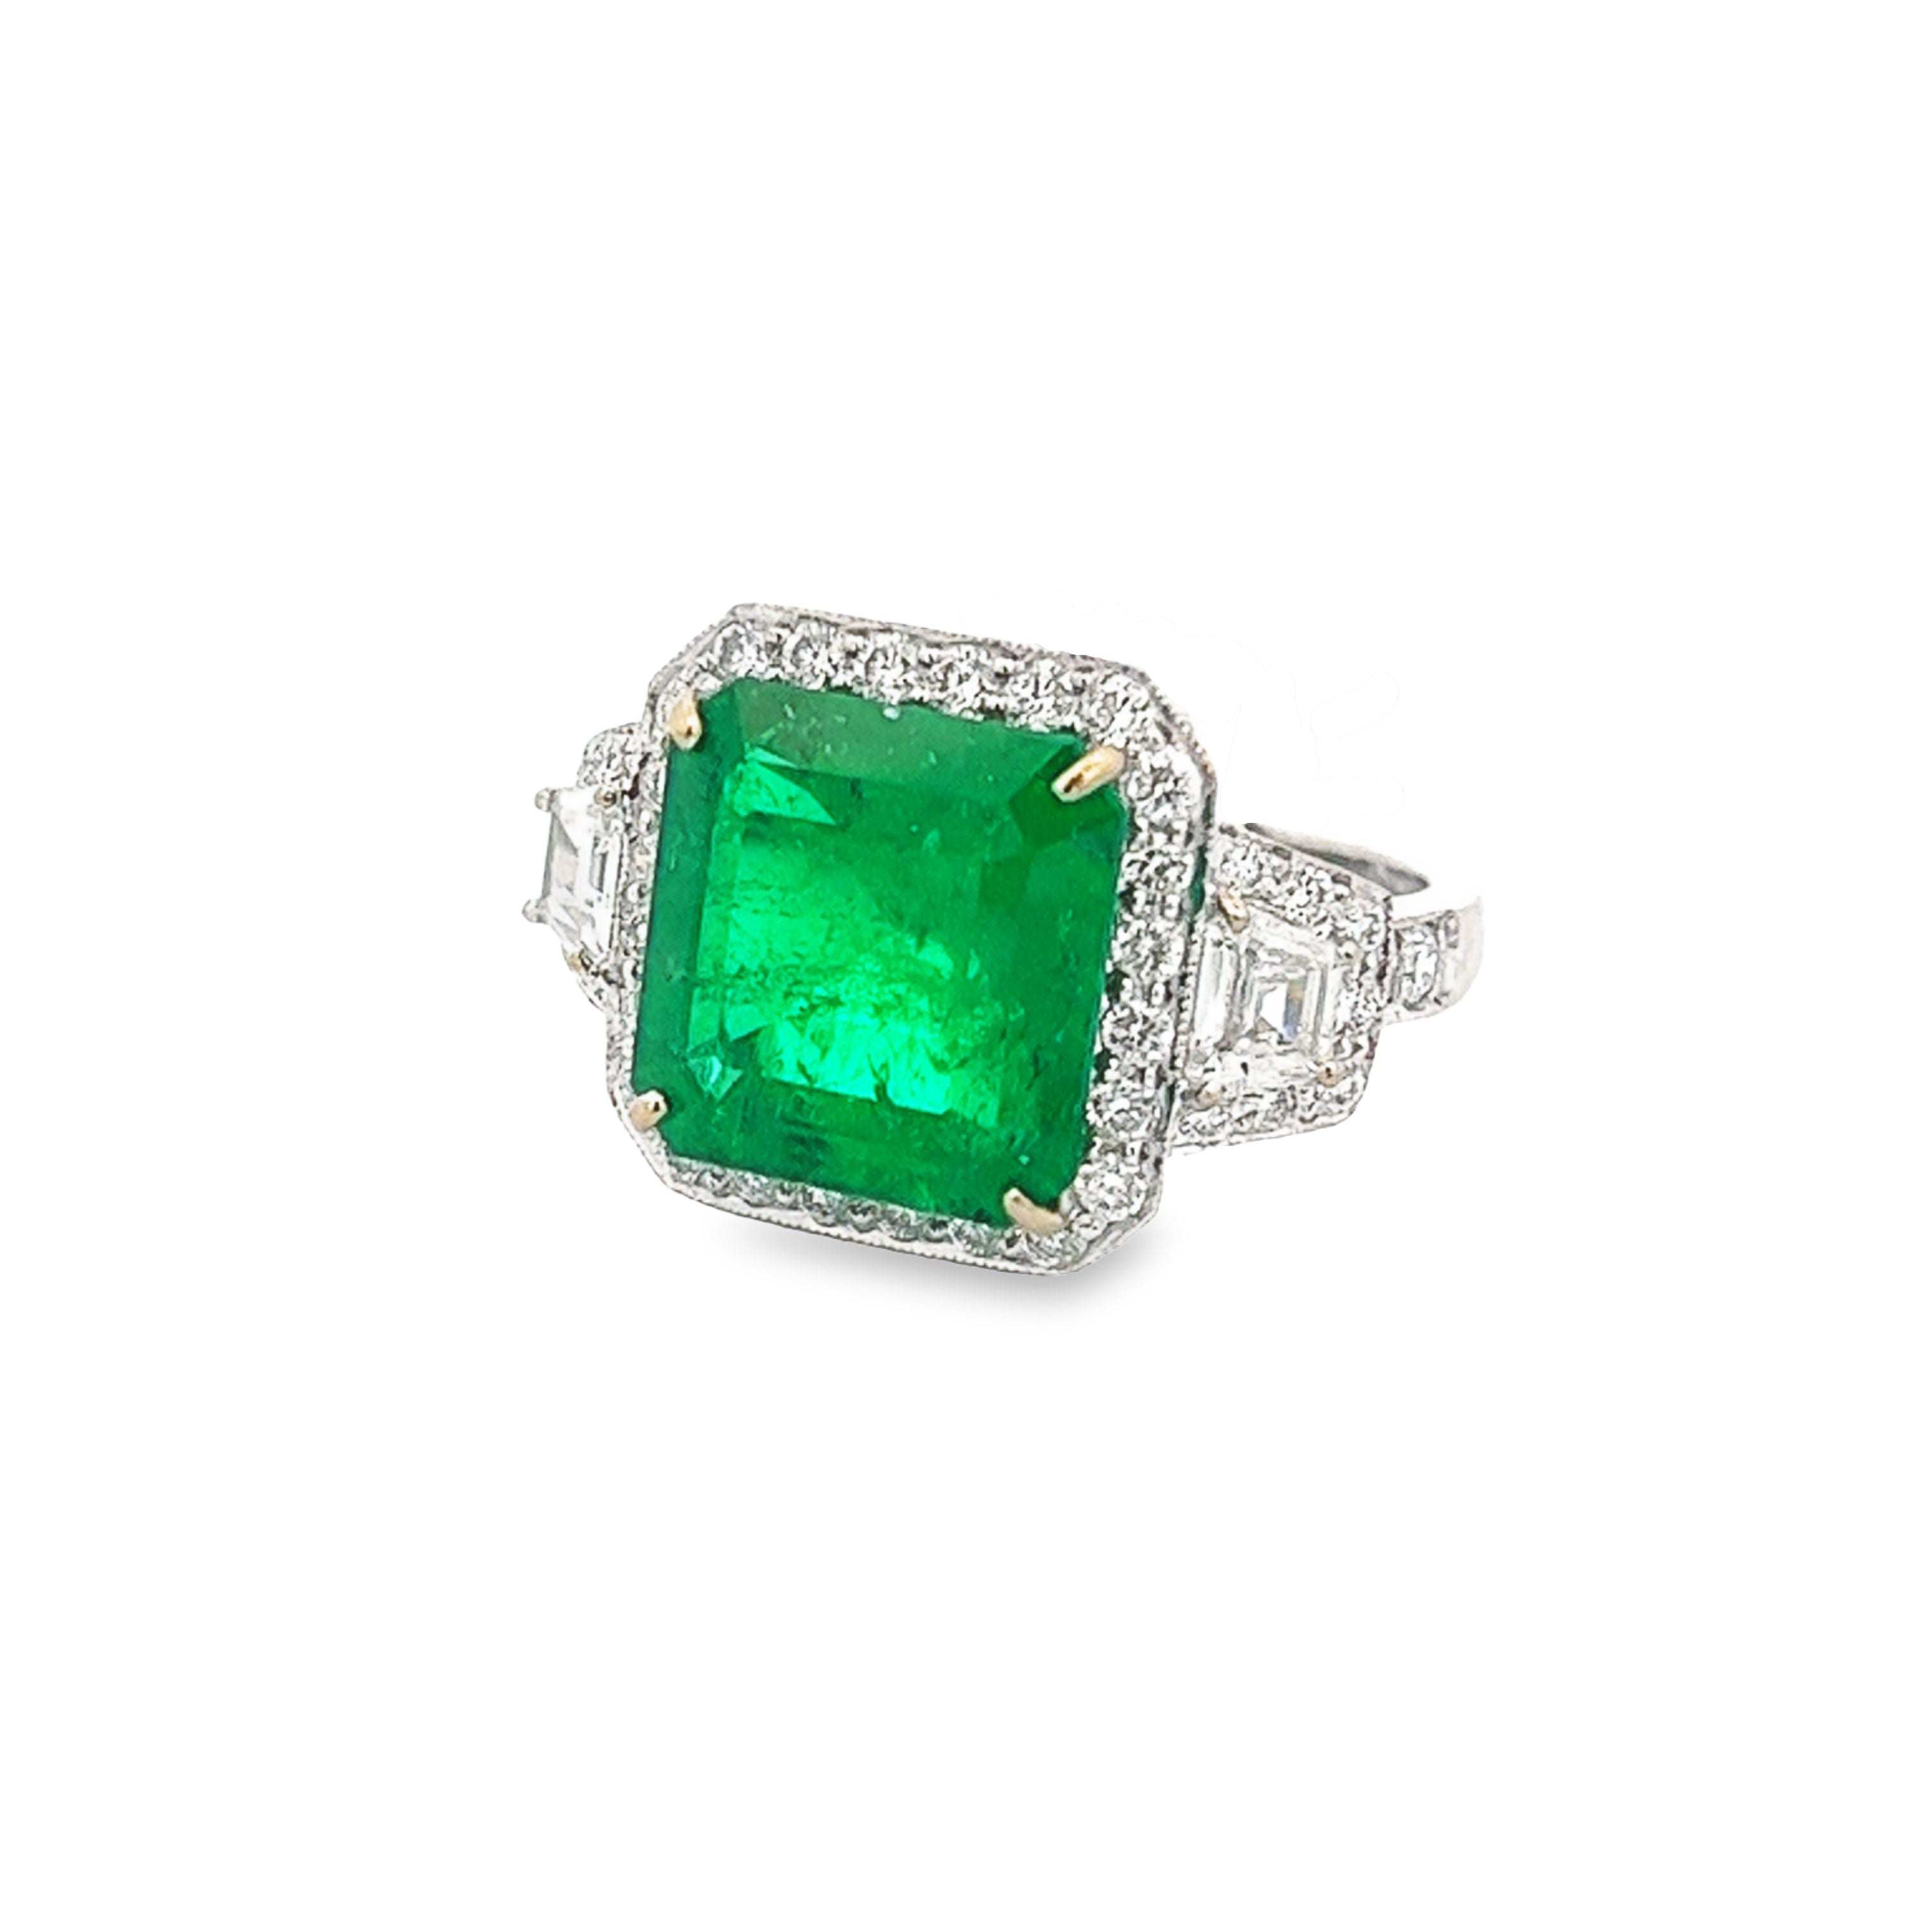 Buy Emerald Cut Emerald Ring, 2 Carats 68 Mm Emerald Cut Engagement Ring, White  Gold Plated Sterling Silver, Green Gemstone Ring, Square Cut Online in  India - Etsy